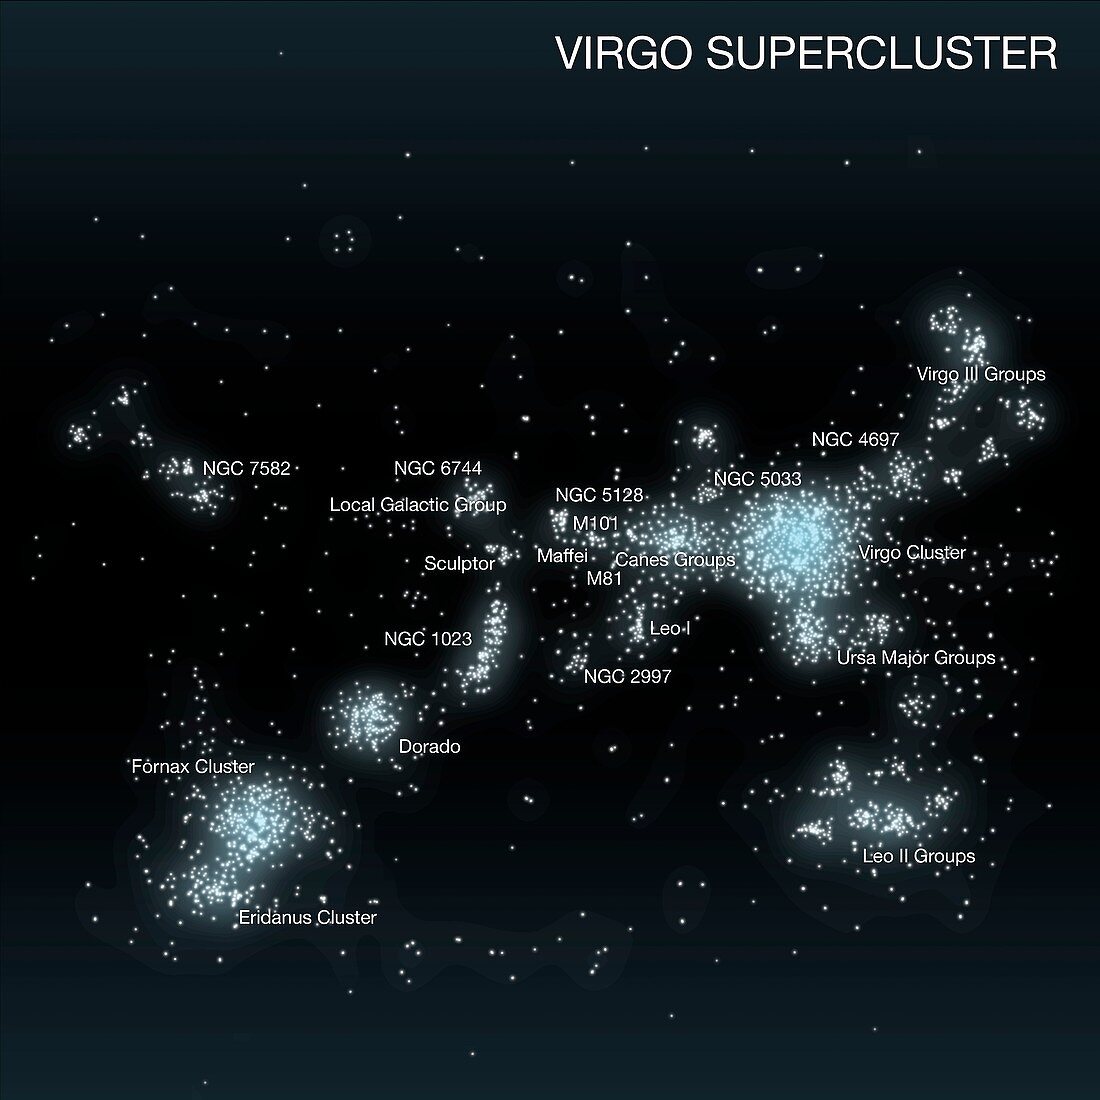 Local Group's location in Virgo Supercluster, illustration